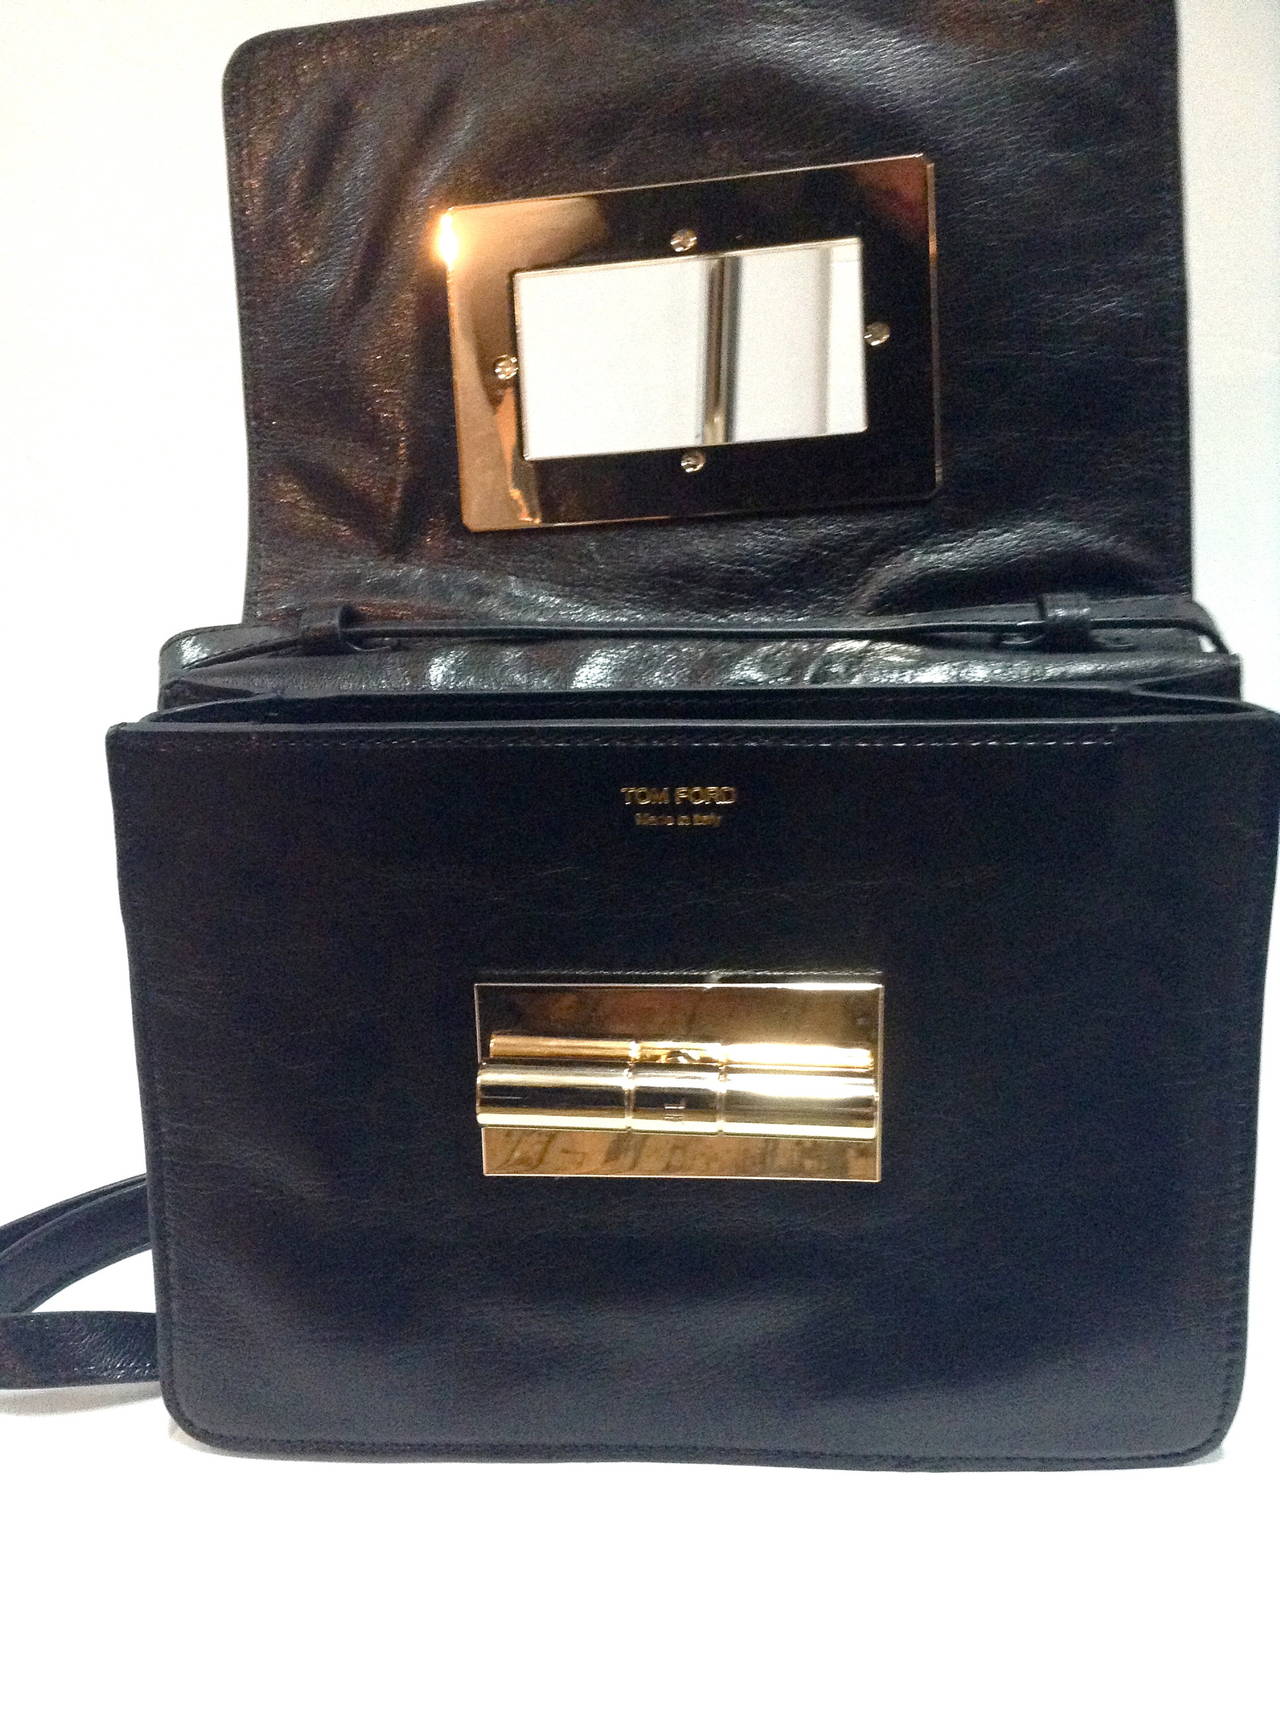 2013 Tom Ford Natalia Large Leather Cross body Bag Retail $4140 For Sale 3